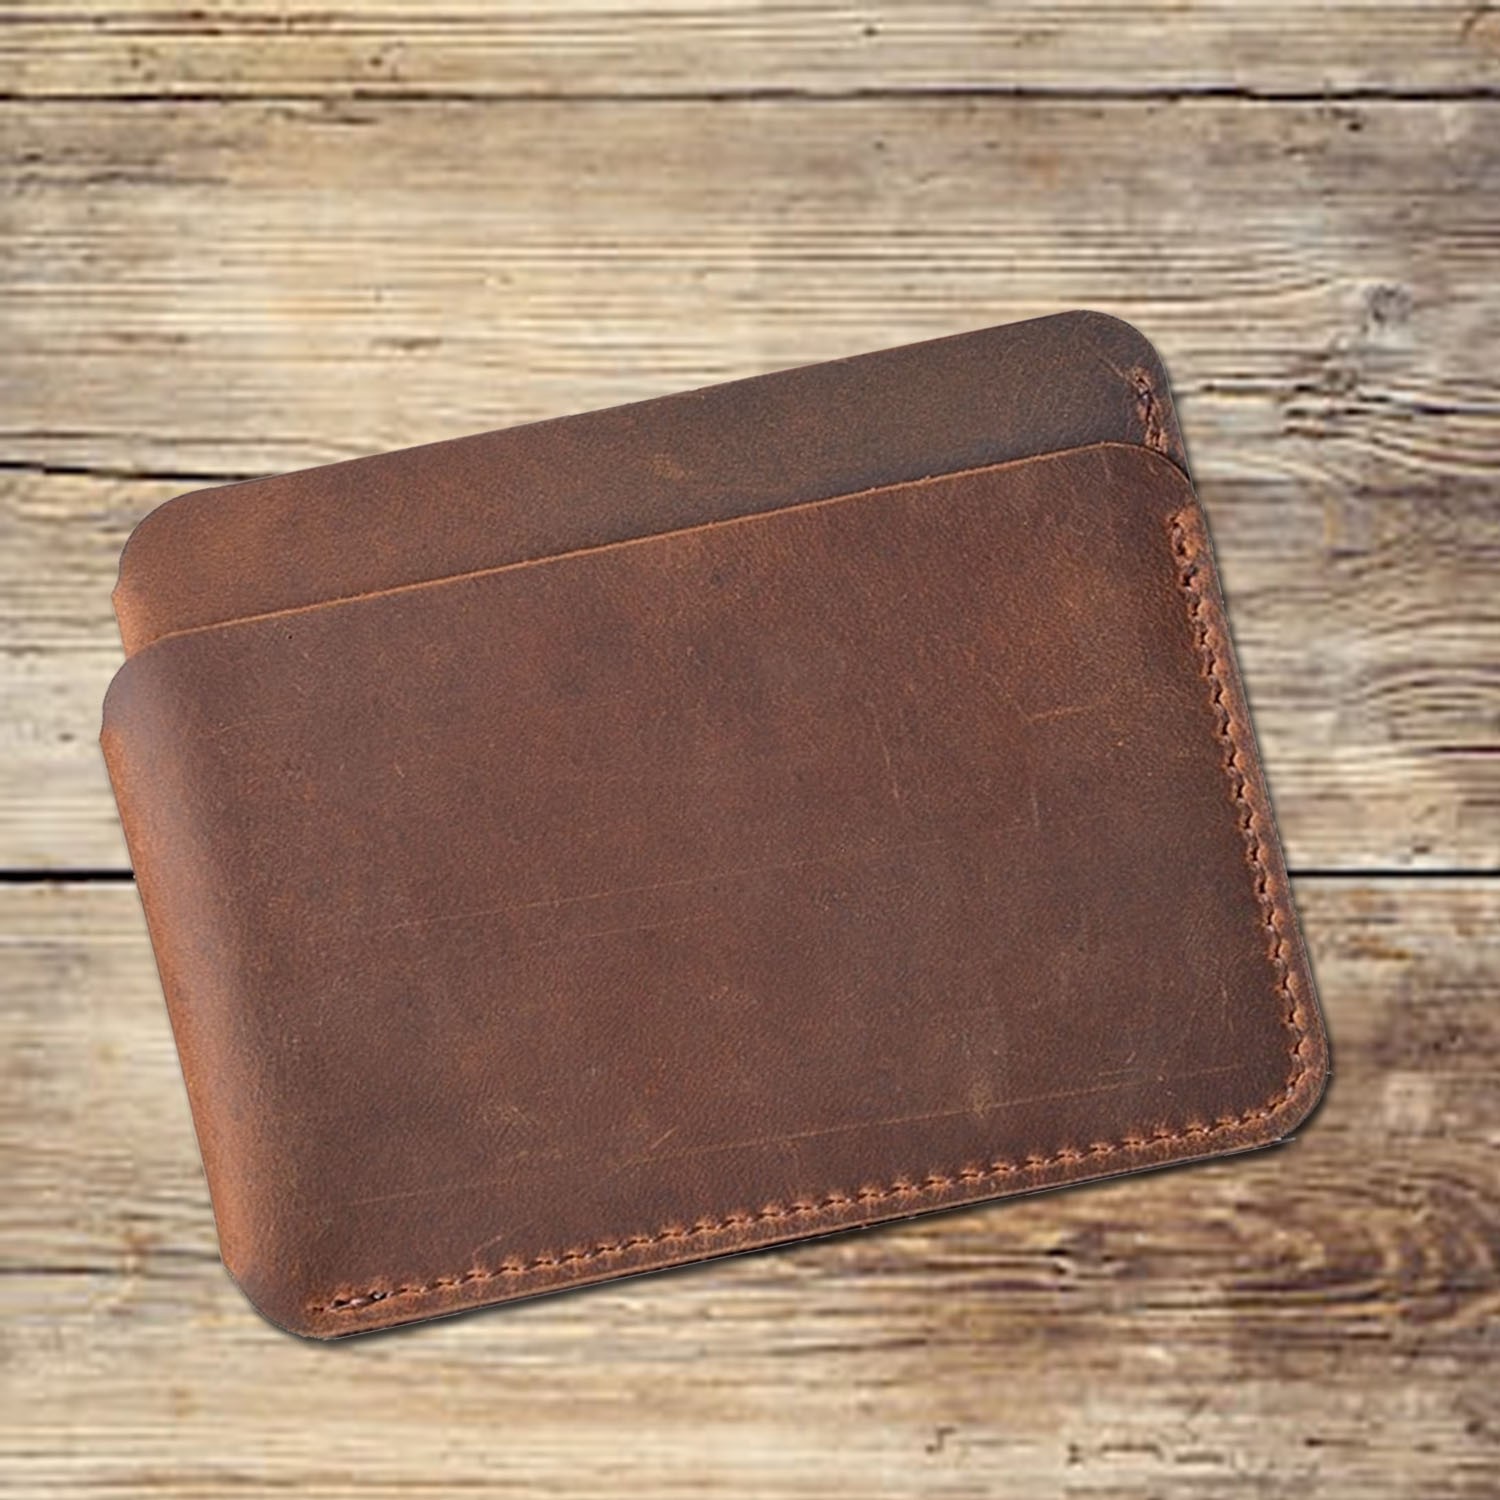 Handmade brown leather card wallet